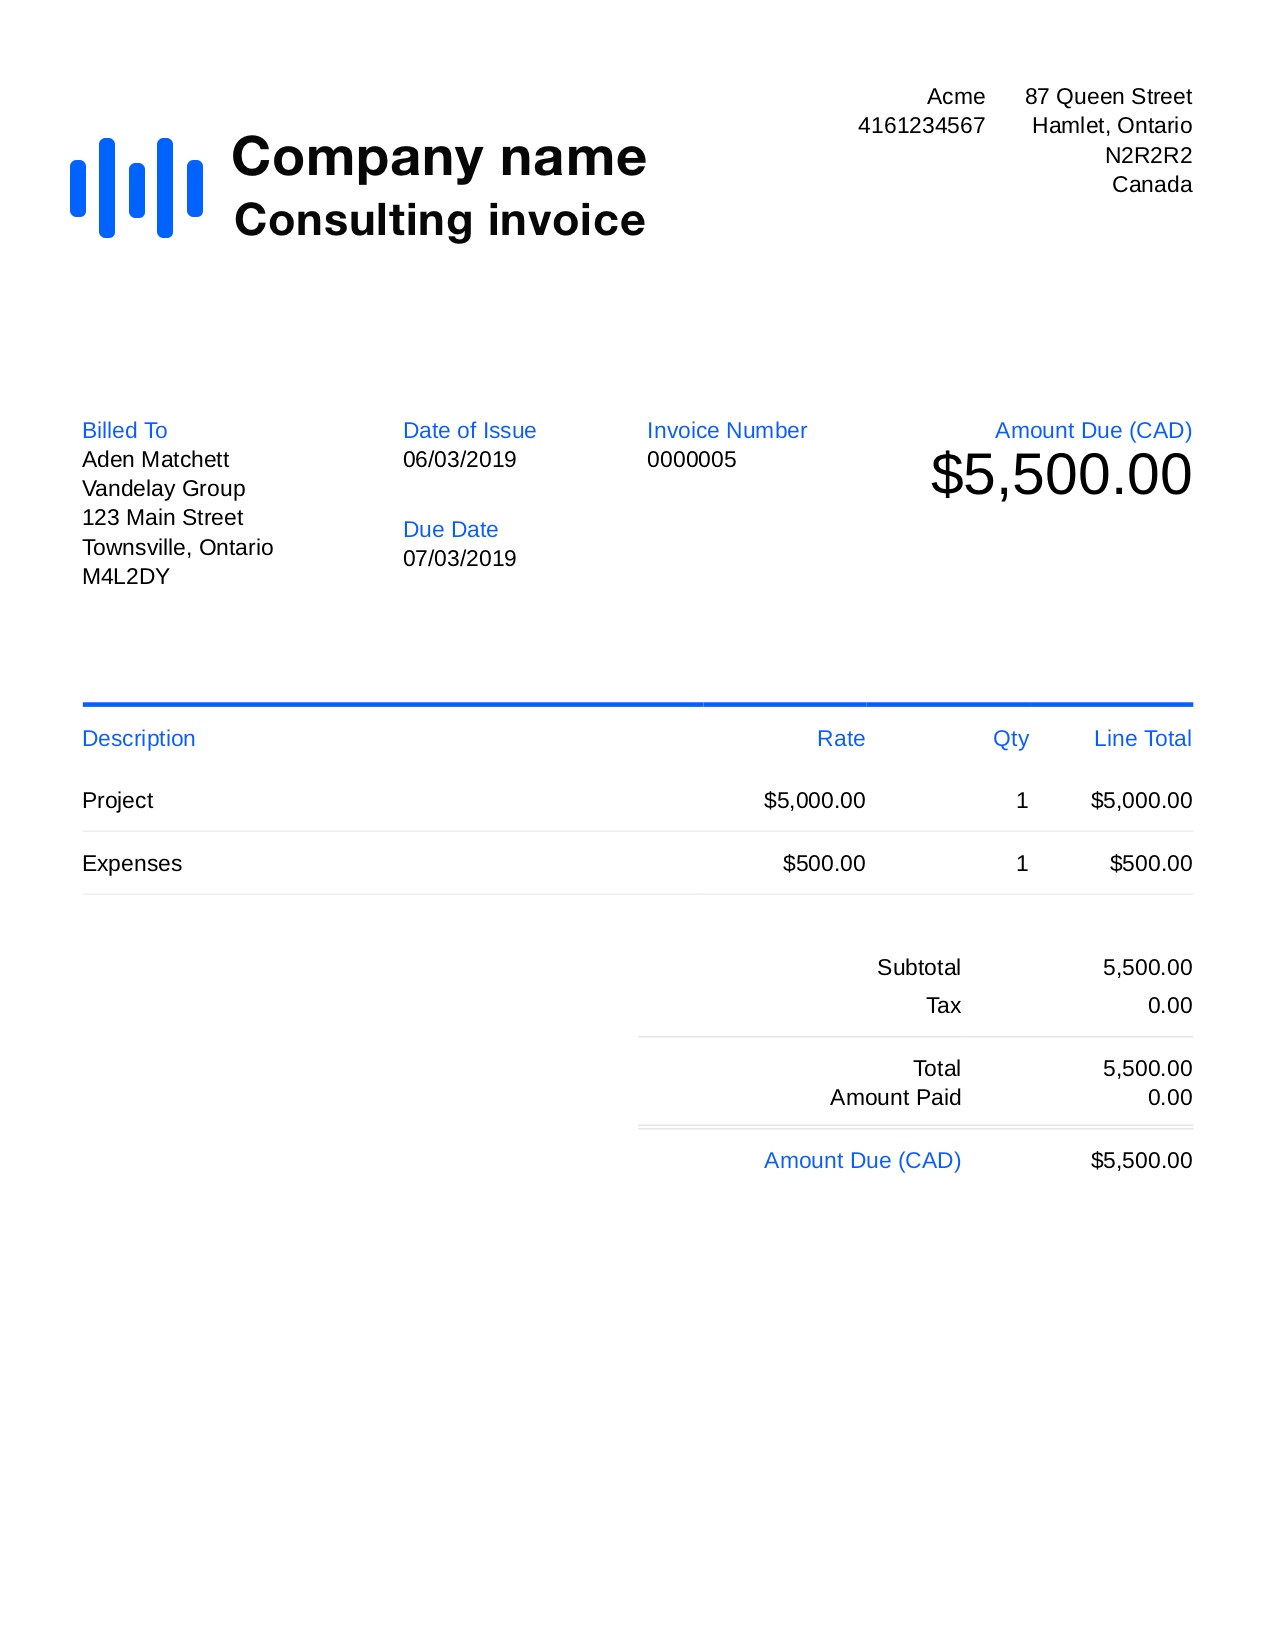 Free Consulting Invoice Template. Customize and Send in 22 Seconds Intended For Software Consulting Invoice Template